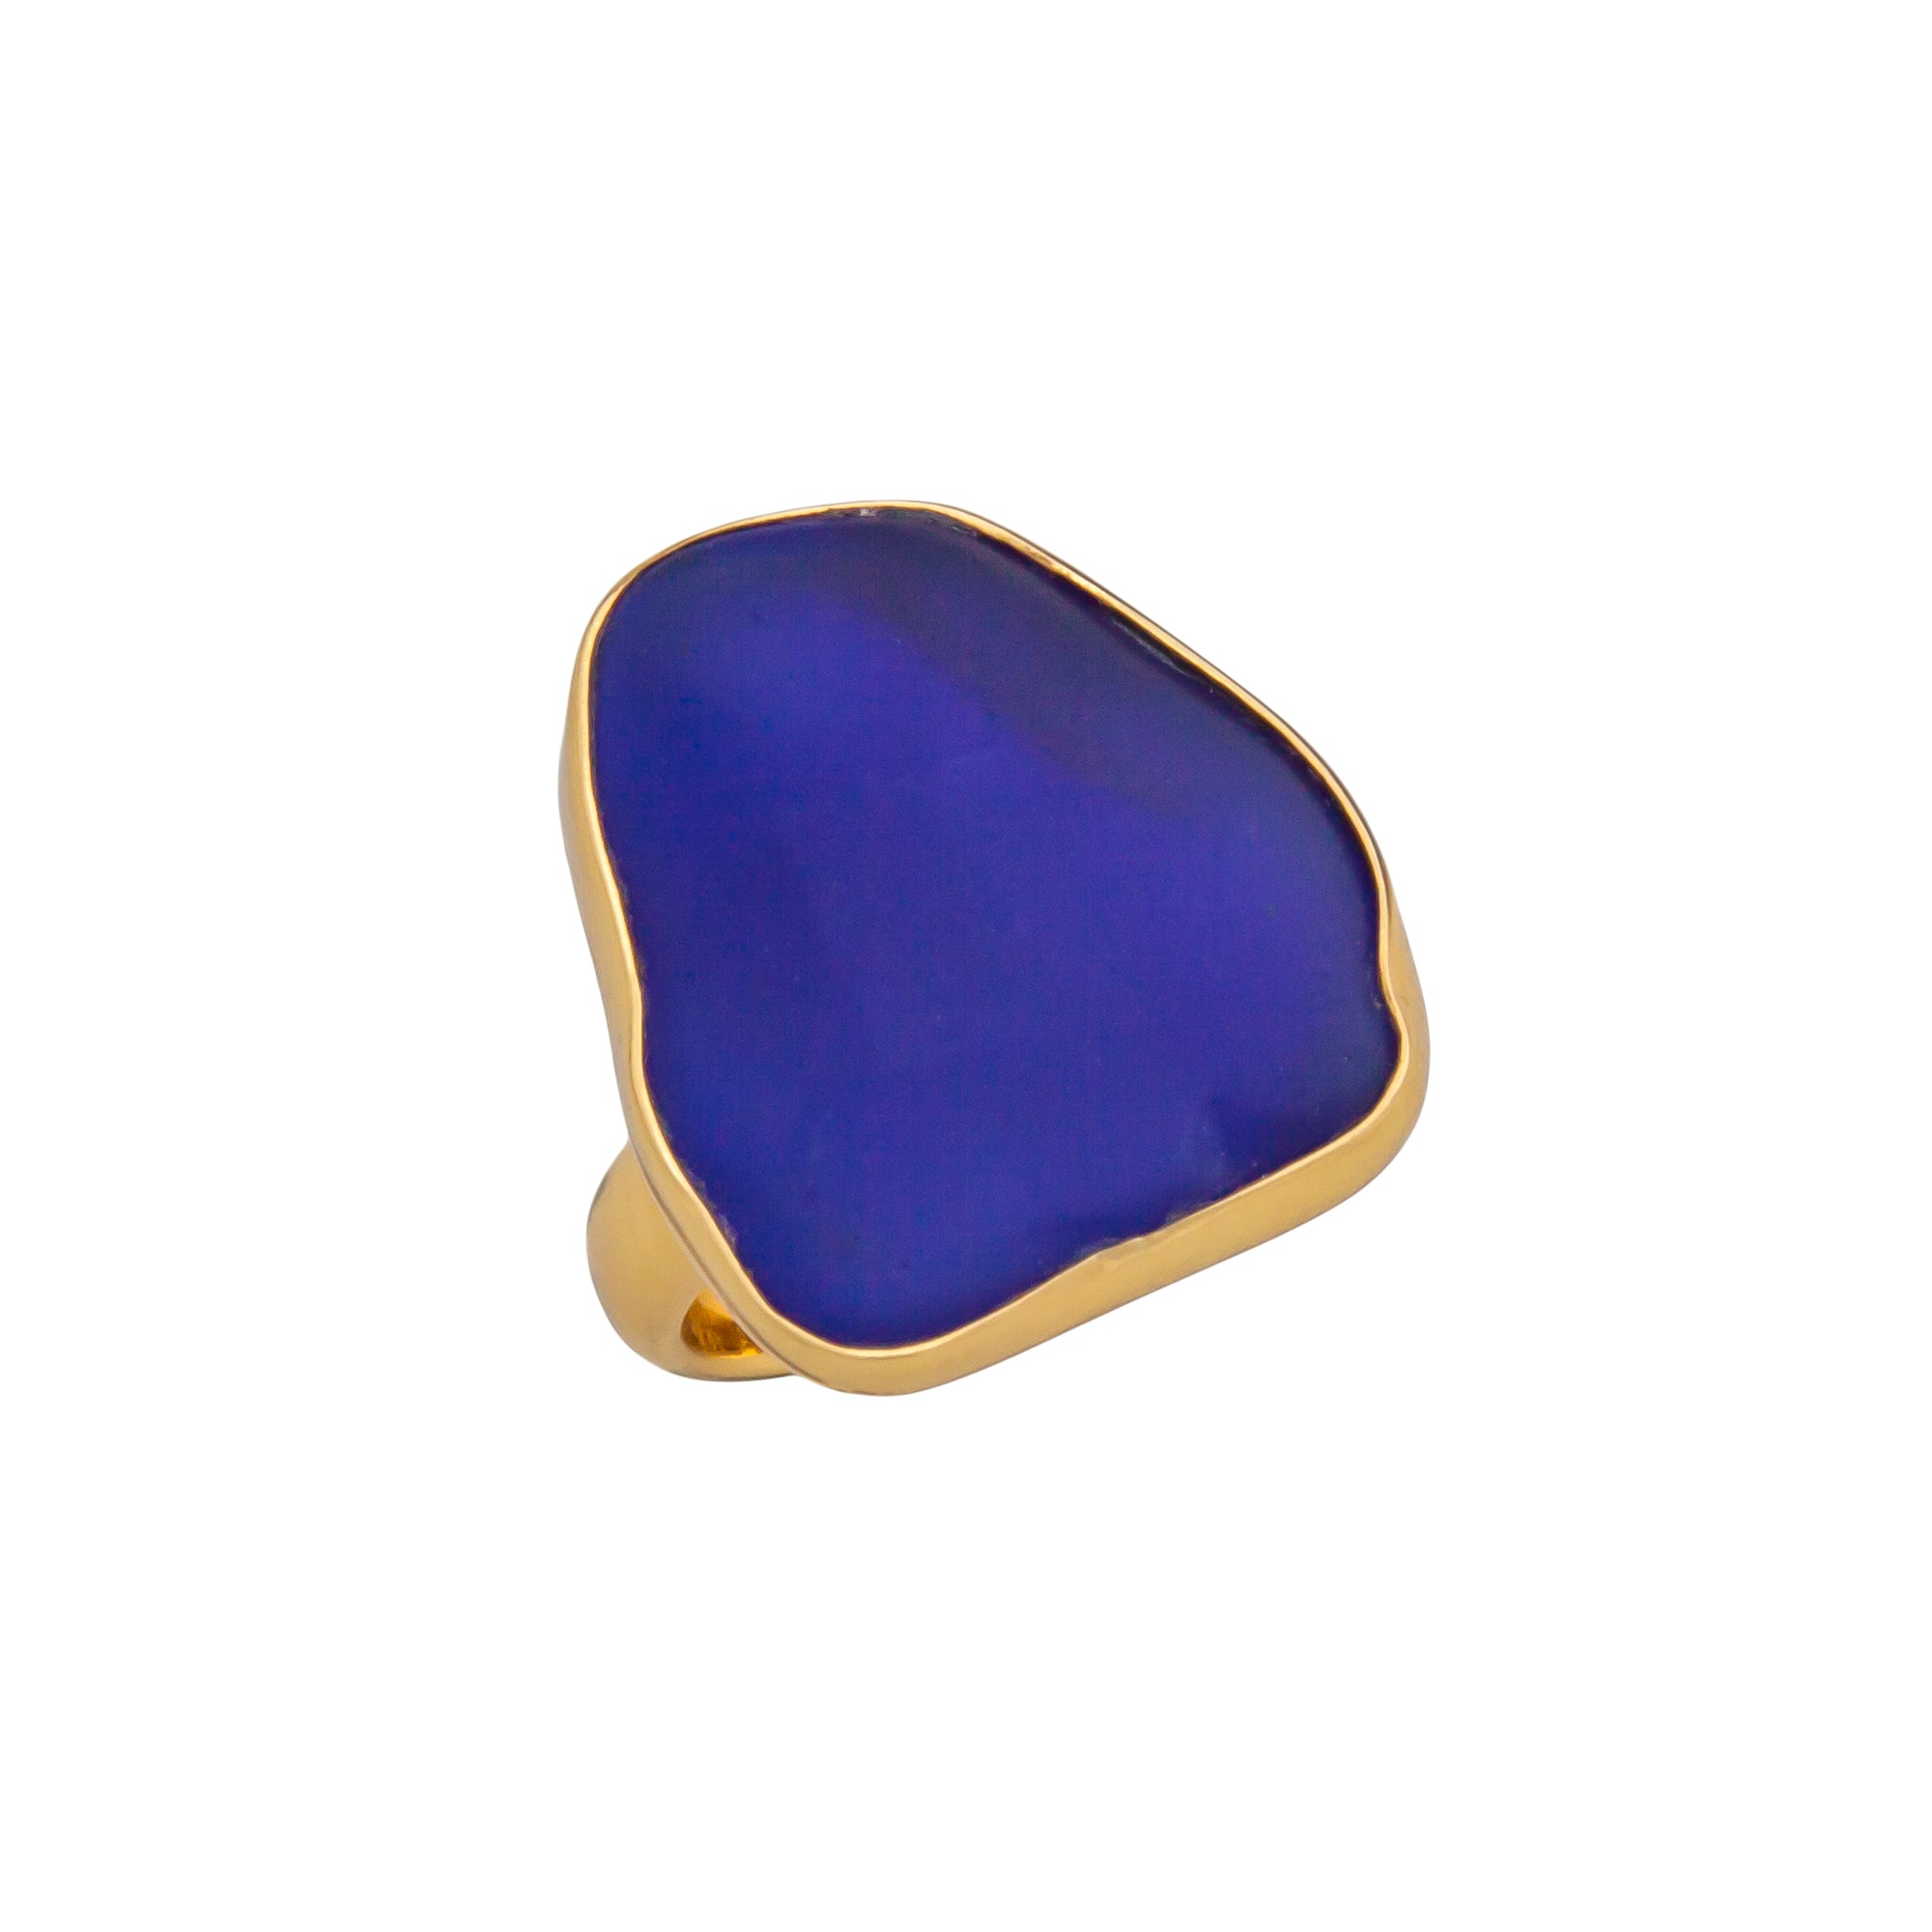 Alchemia Cobalt Blue Recycled Glass Adjustable Ring | Charles Albert Jewelry